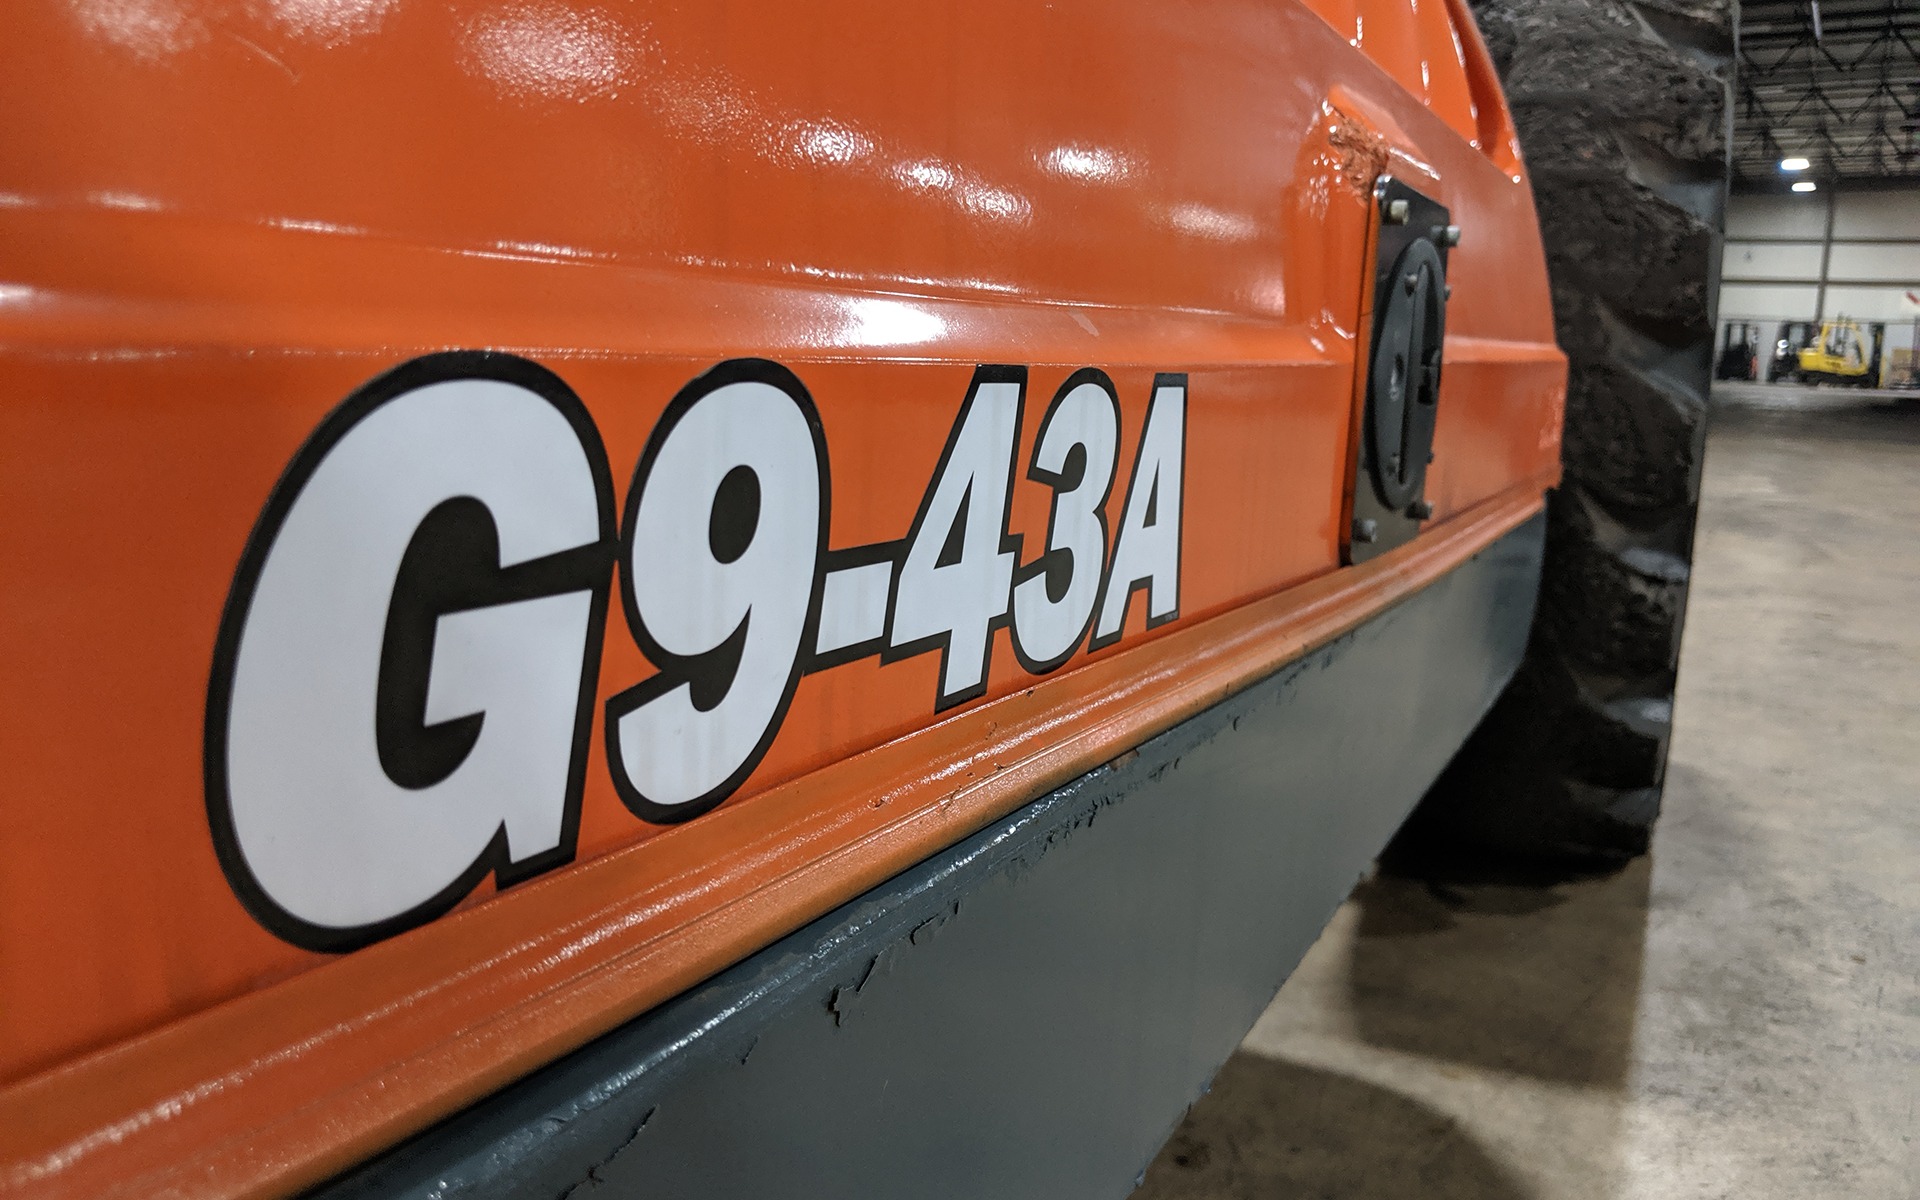 Used 2010 JLG G9-43A  | Cary, IL